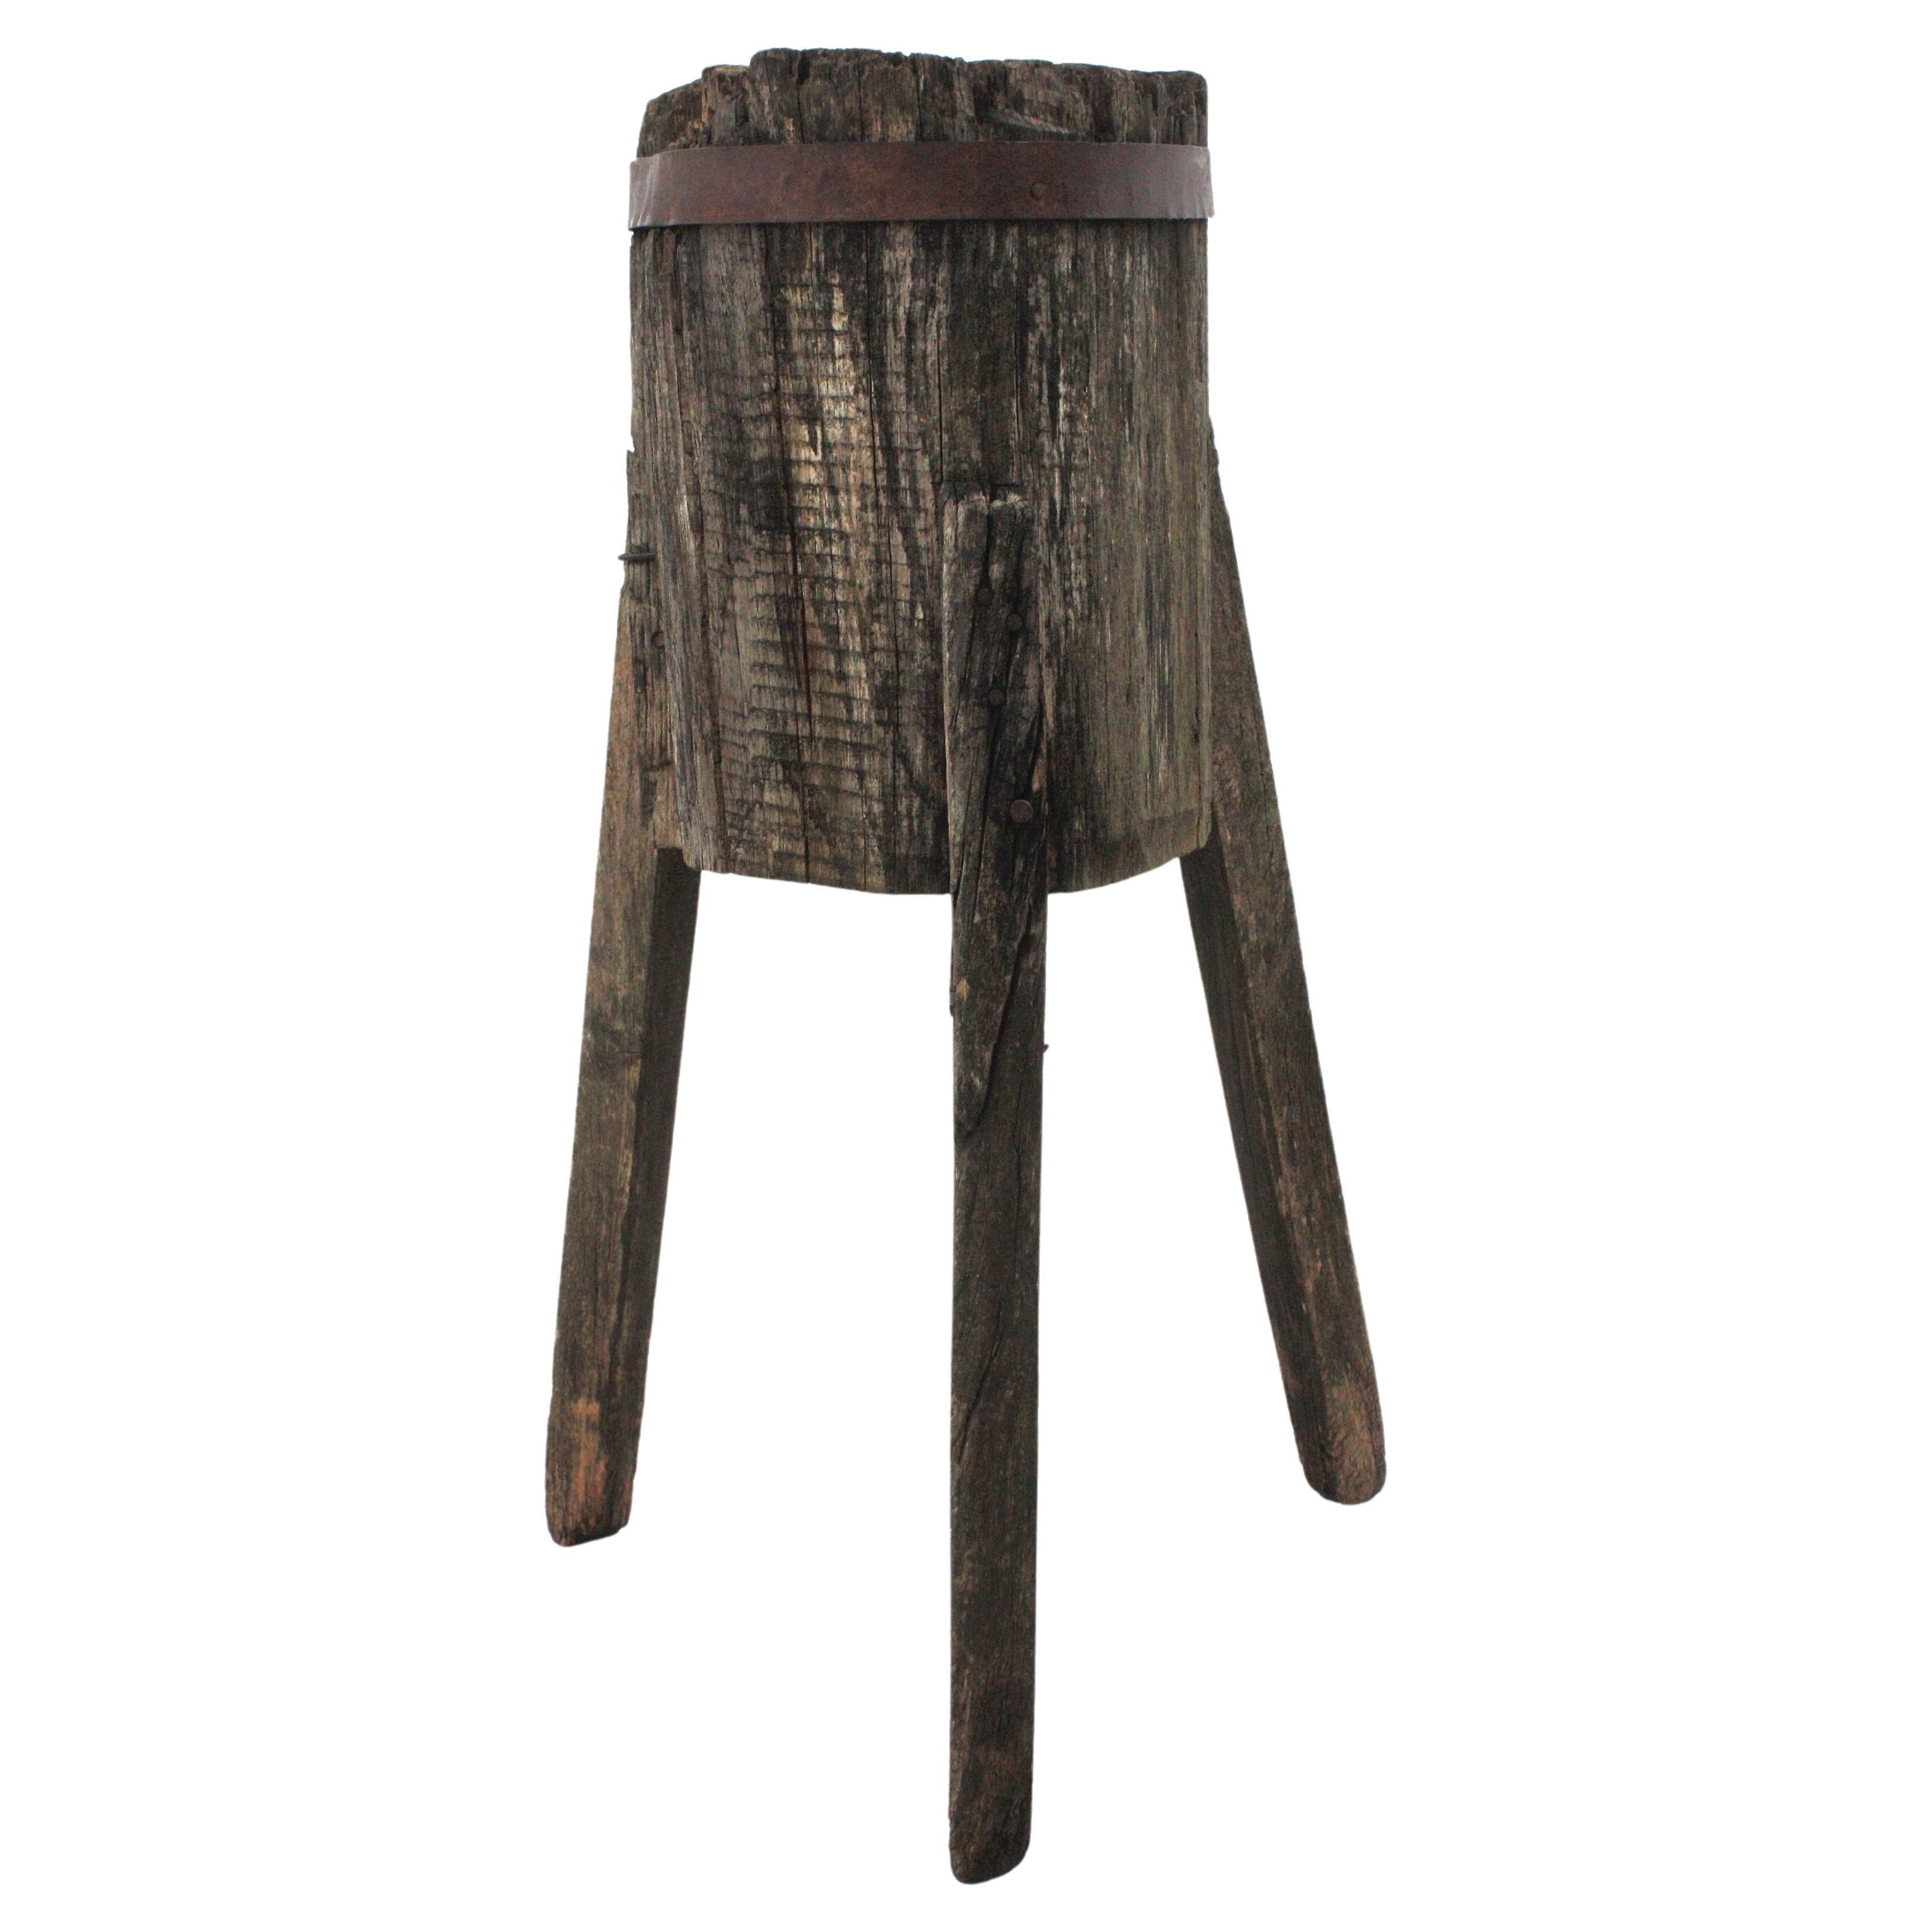 Spanish Butcher Block Side Table / Brutalist Wabi Sabi Rustic Tripod Side Table, 1930s- 1940s
Originally used as butcher's table.To be used as side table or stand to display sculptures or decorative objects.
The Murano glass squirrel sculpture and